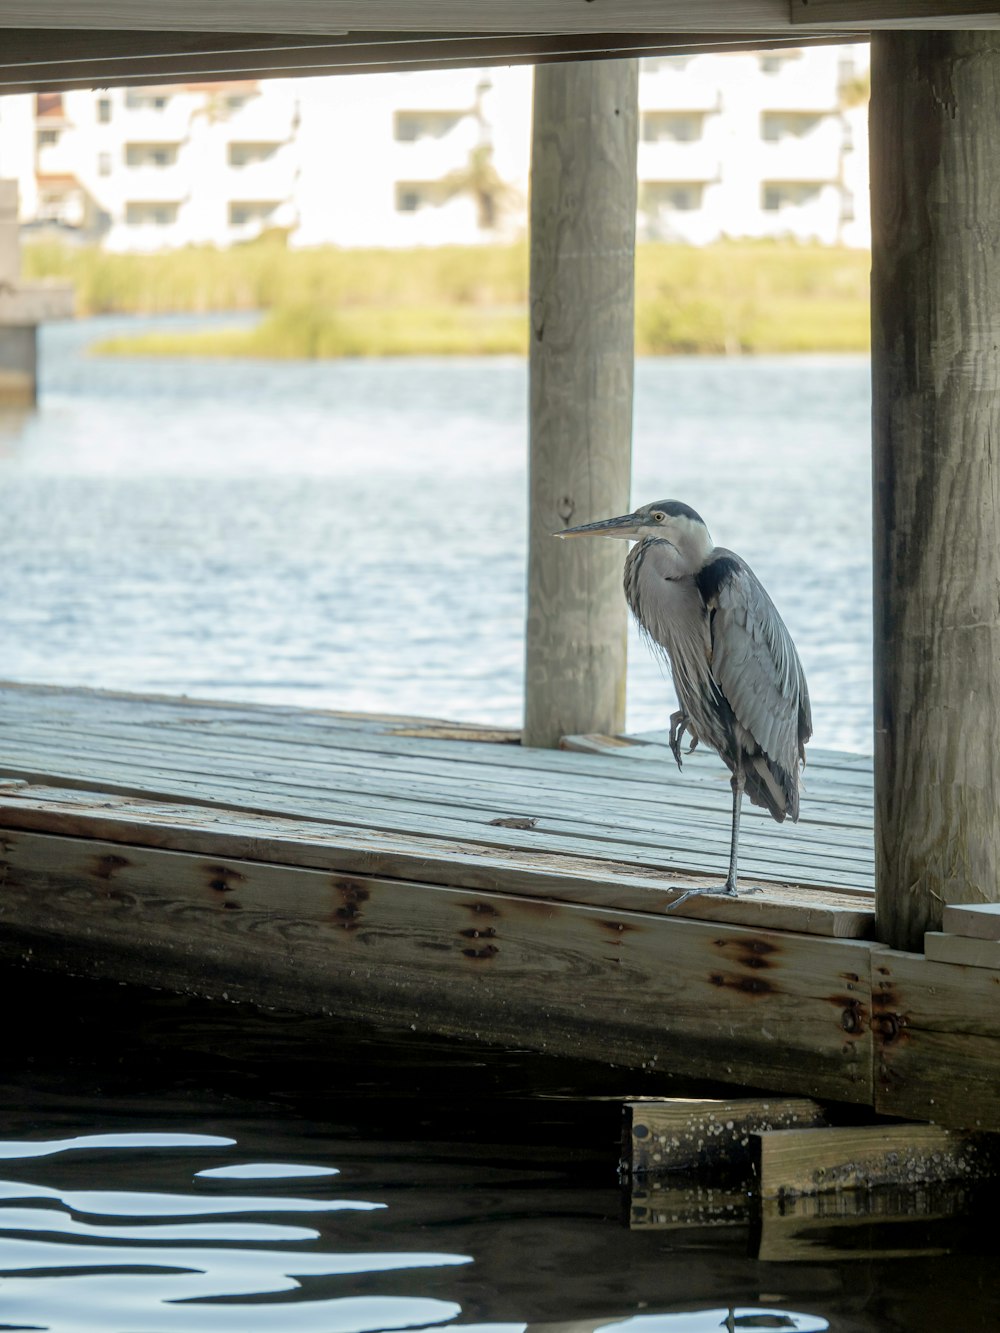 a bird standing on a wooden dock next to a body of water